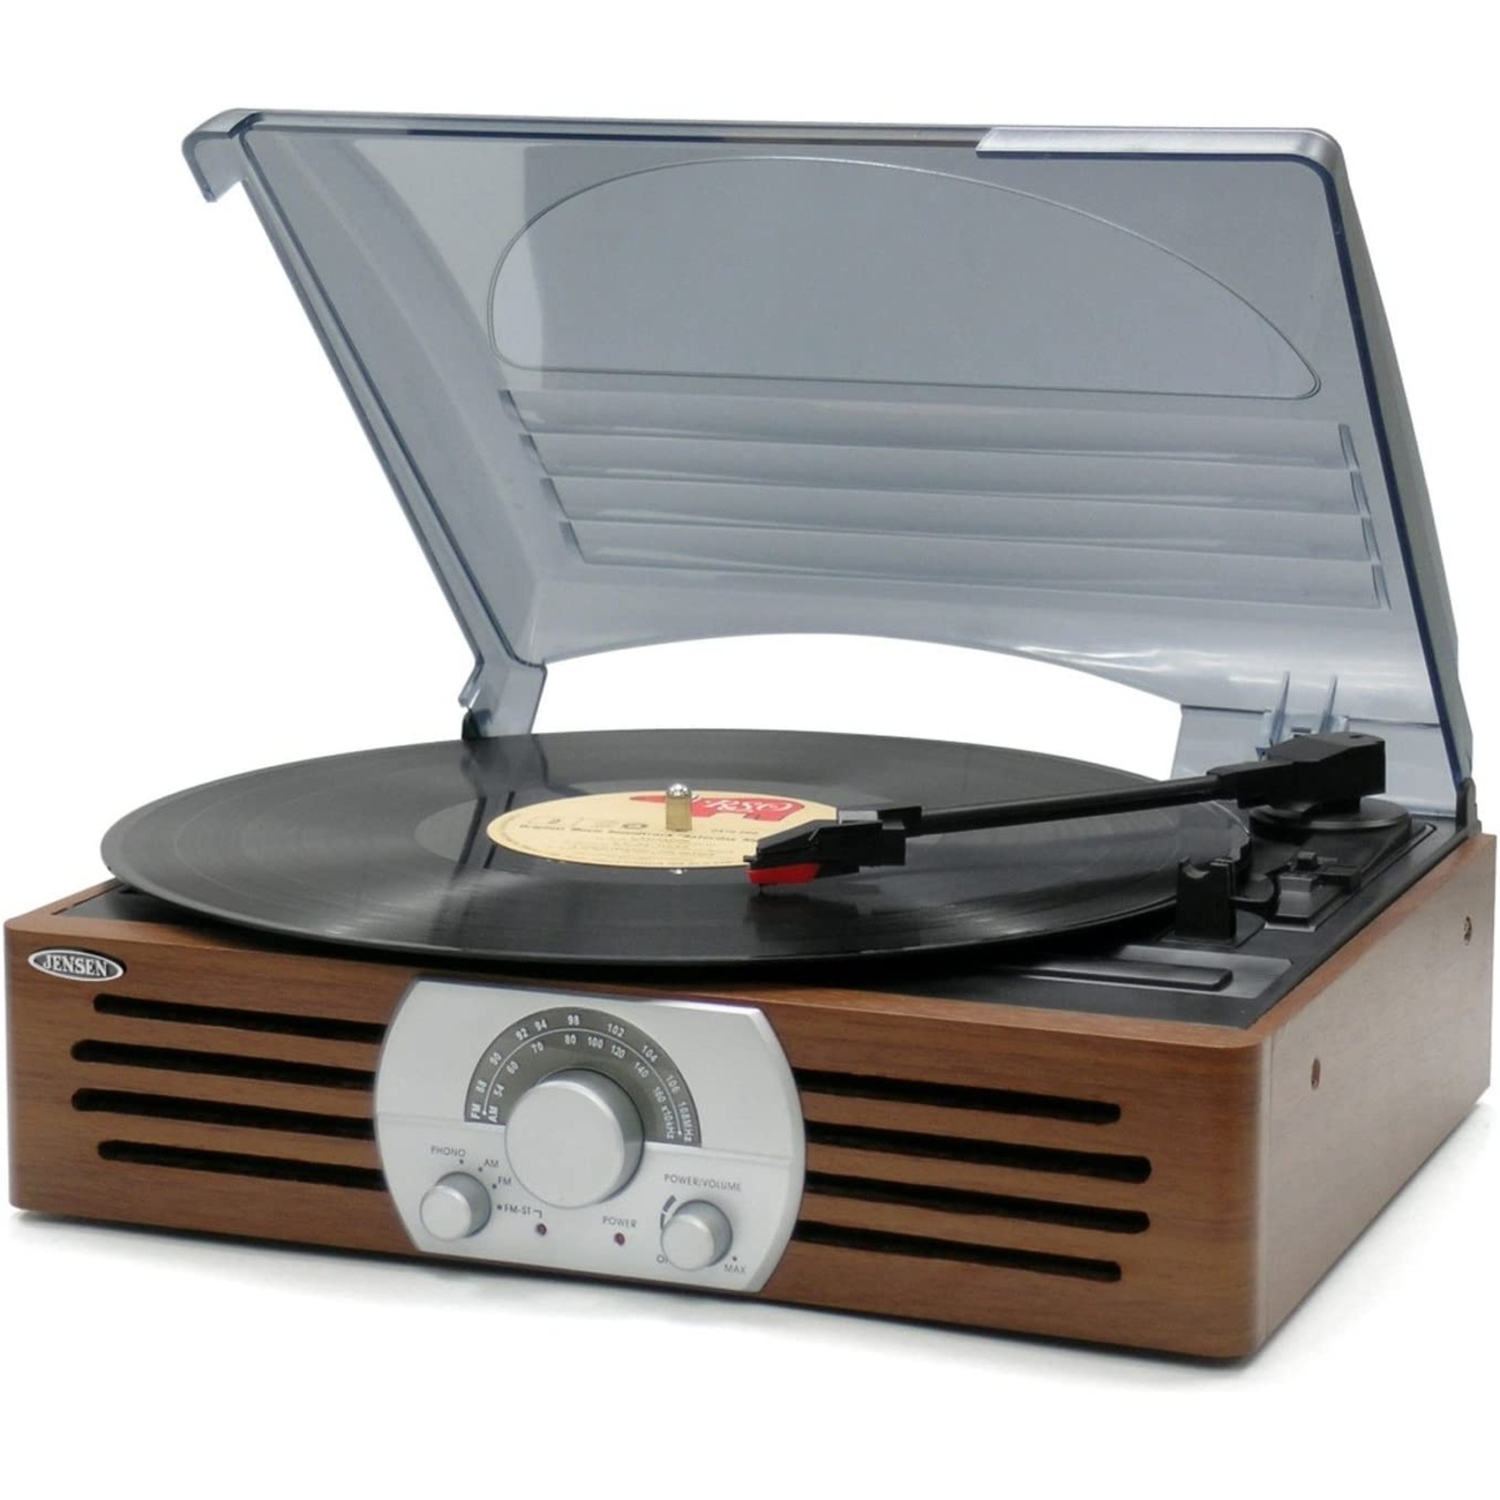 JENSEN JTA-222P Turntable with AM/FM And Pitch Control - image 1 of 6